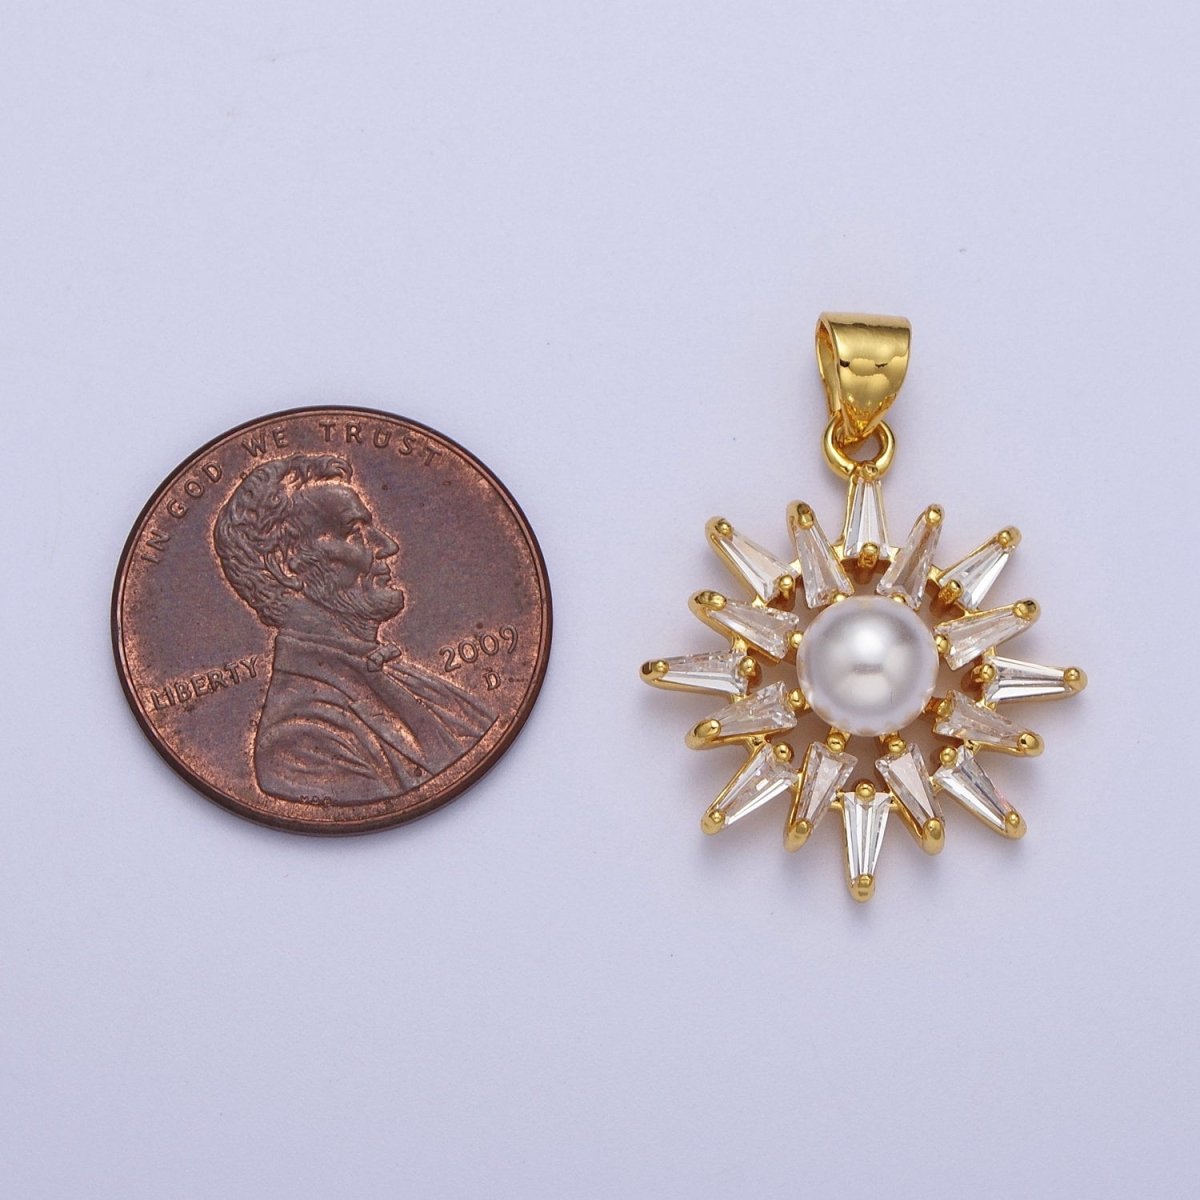 Gold Sun Pendant With Clear Marquise Stone and Pearl Charm for Necklace Pendant X-686 - DLUXCA